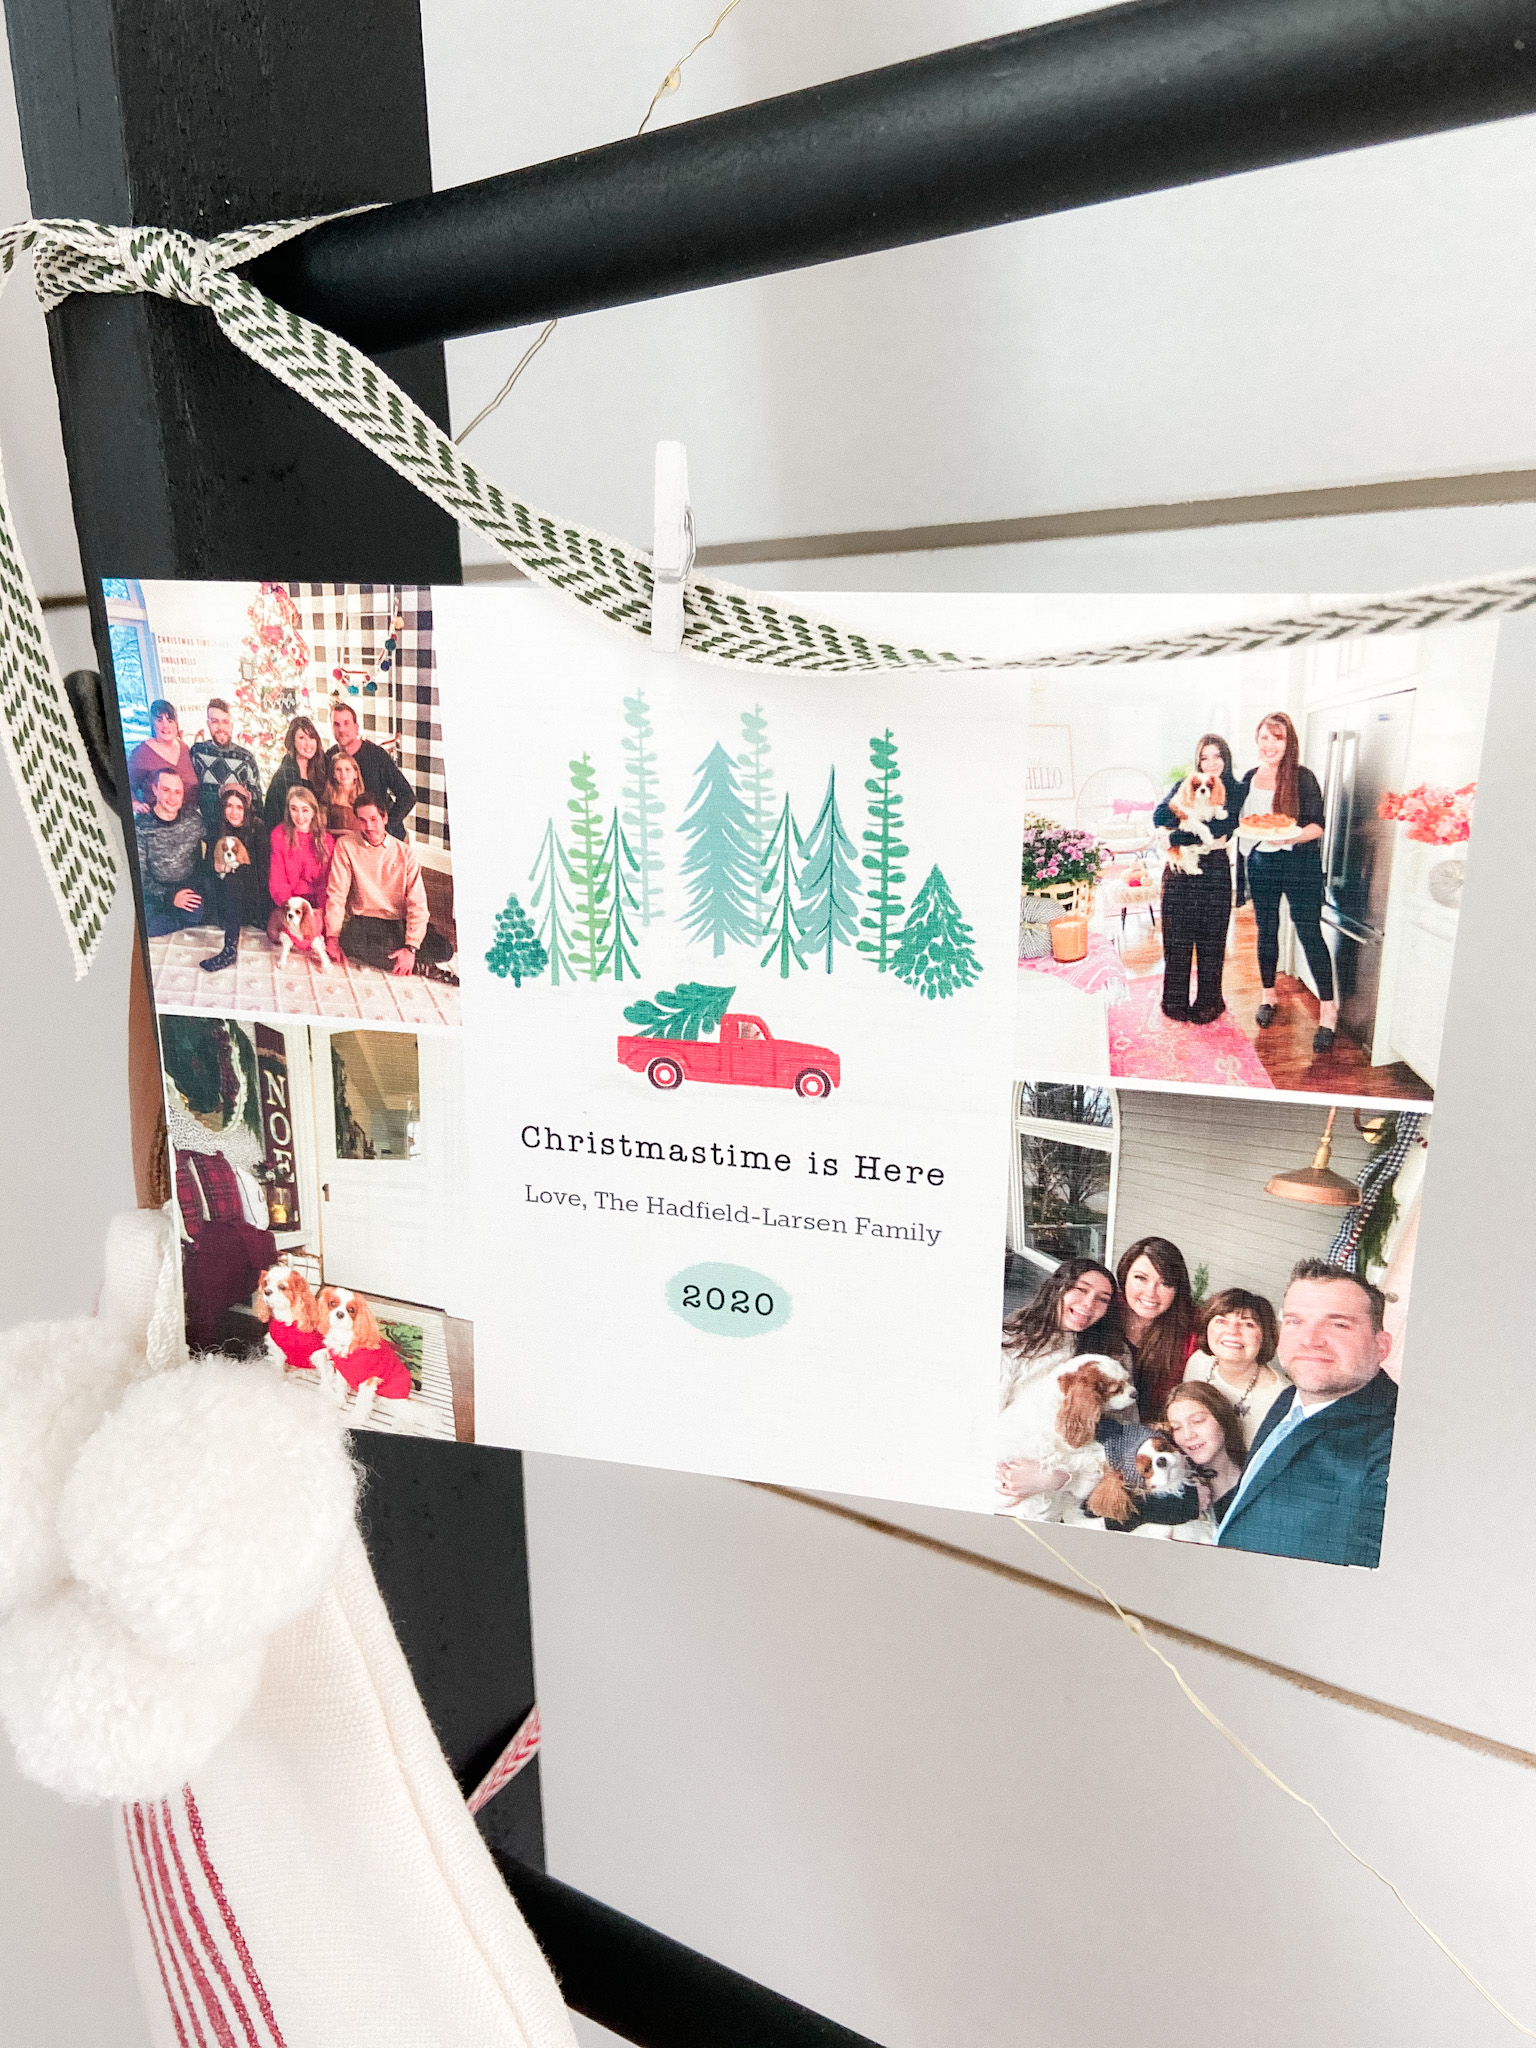 DIY Holiday Card Display Ladder. Build this simple ladder to display cards and stockings this holiday season! 